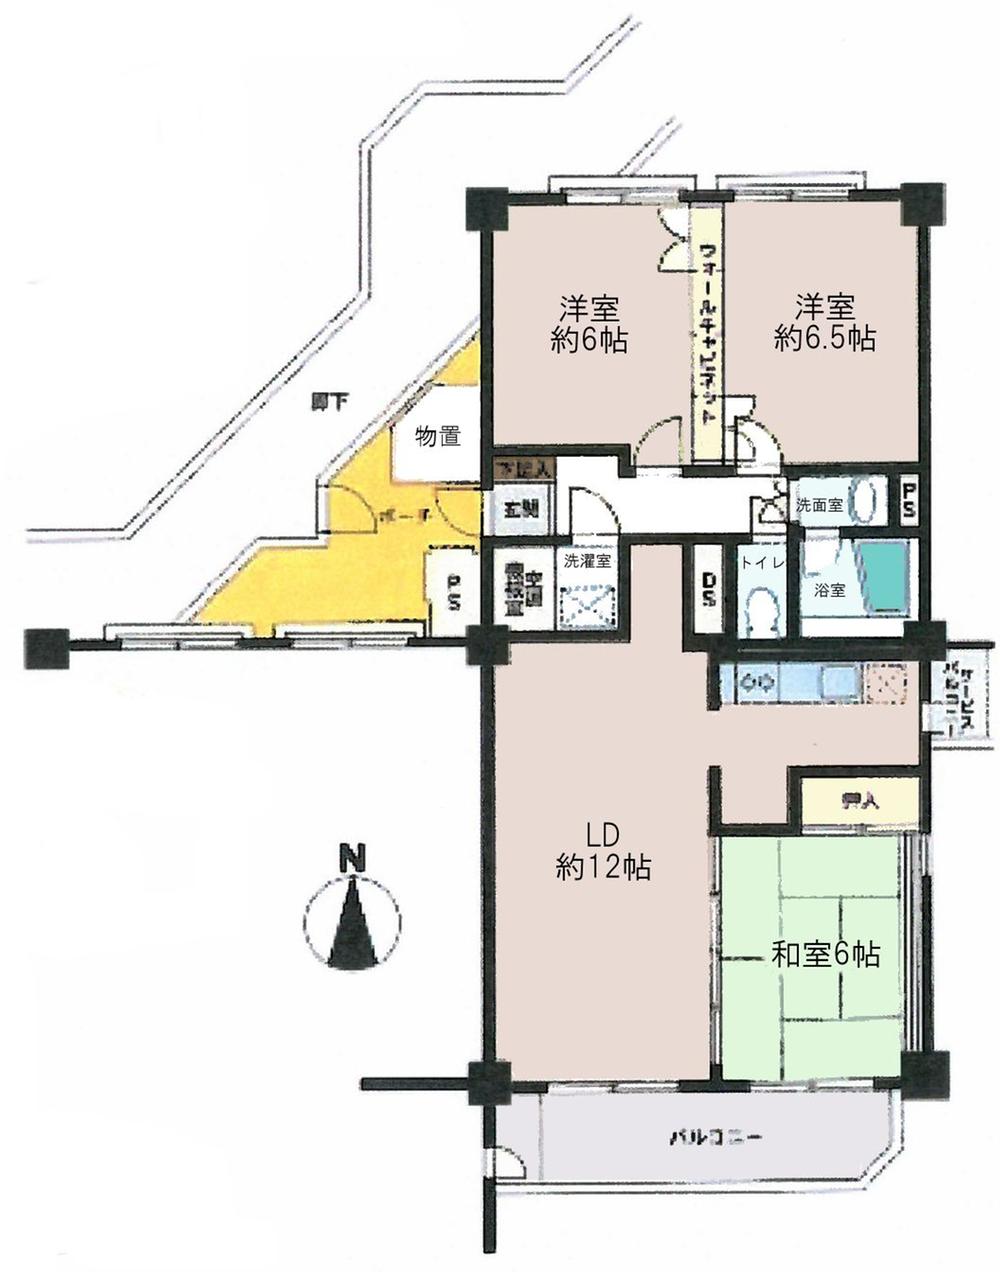 Floor plan. 3LDK, Price 16 million yen, Occupied area 77.29 sq m , It has been taking the balcony area 8.7 sq m entrance porch diagonally, Also open the window of the room making it difficult to be seen from the front.